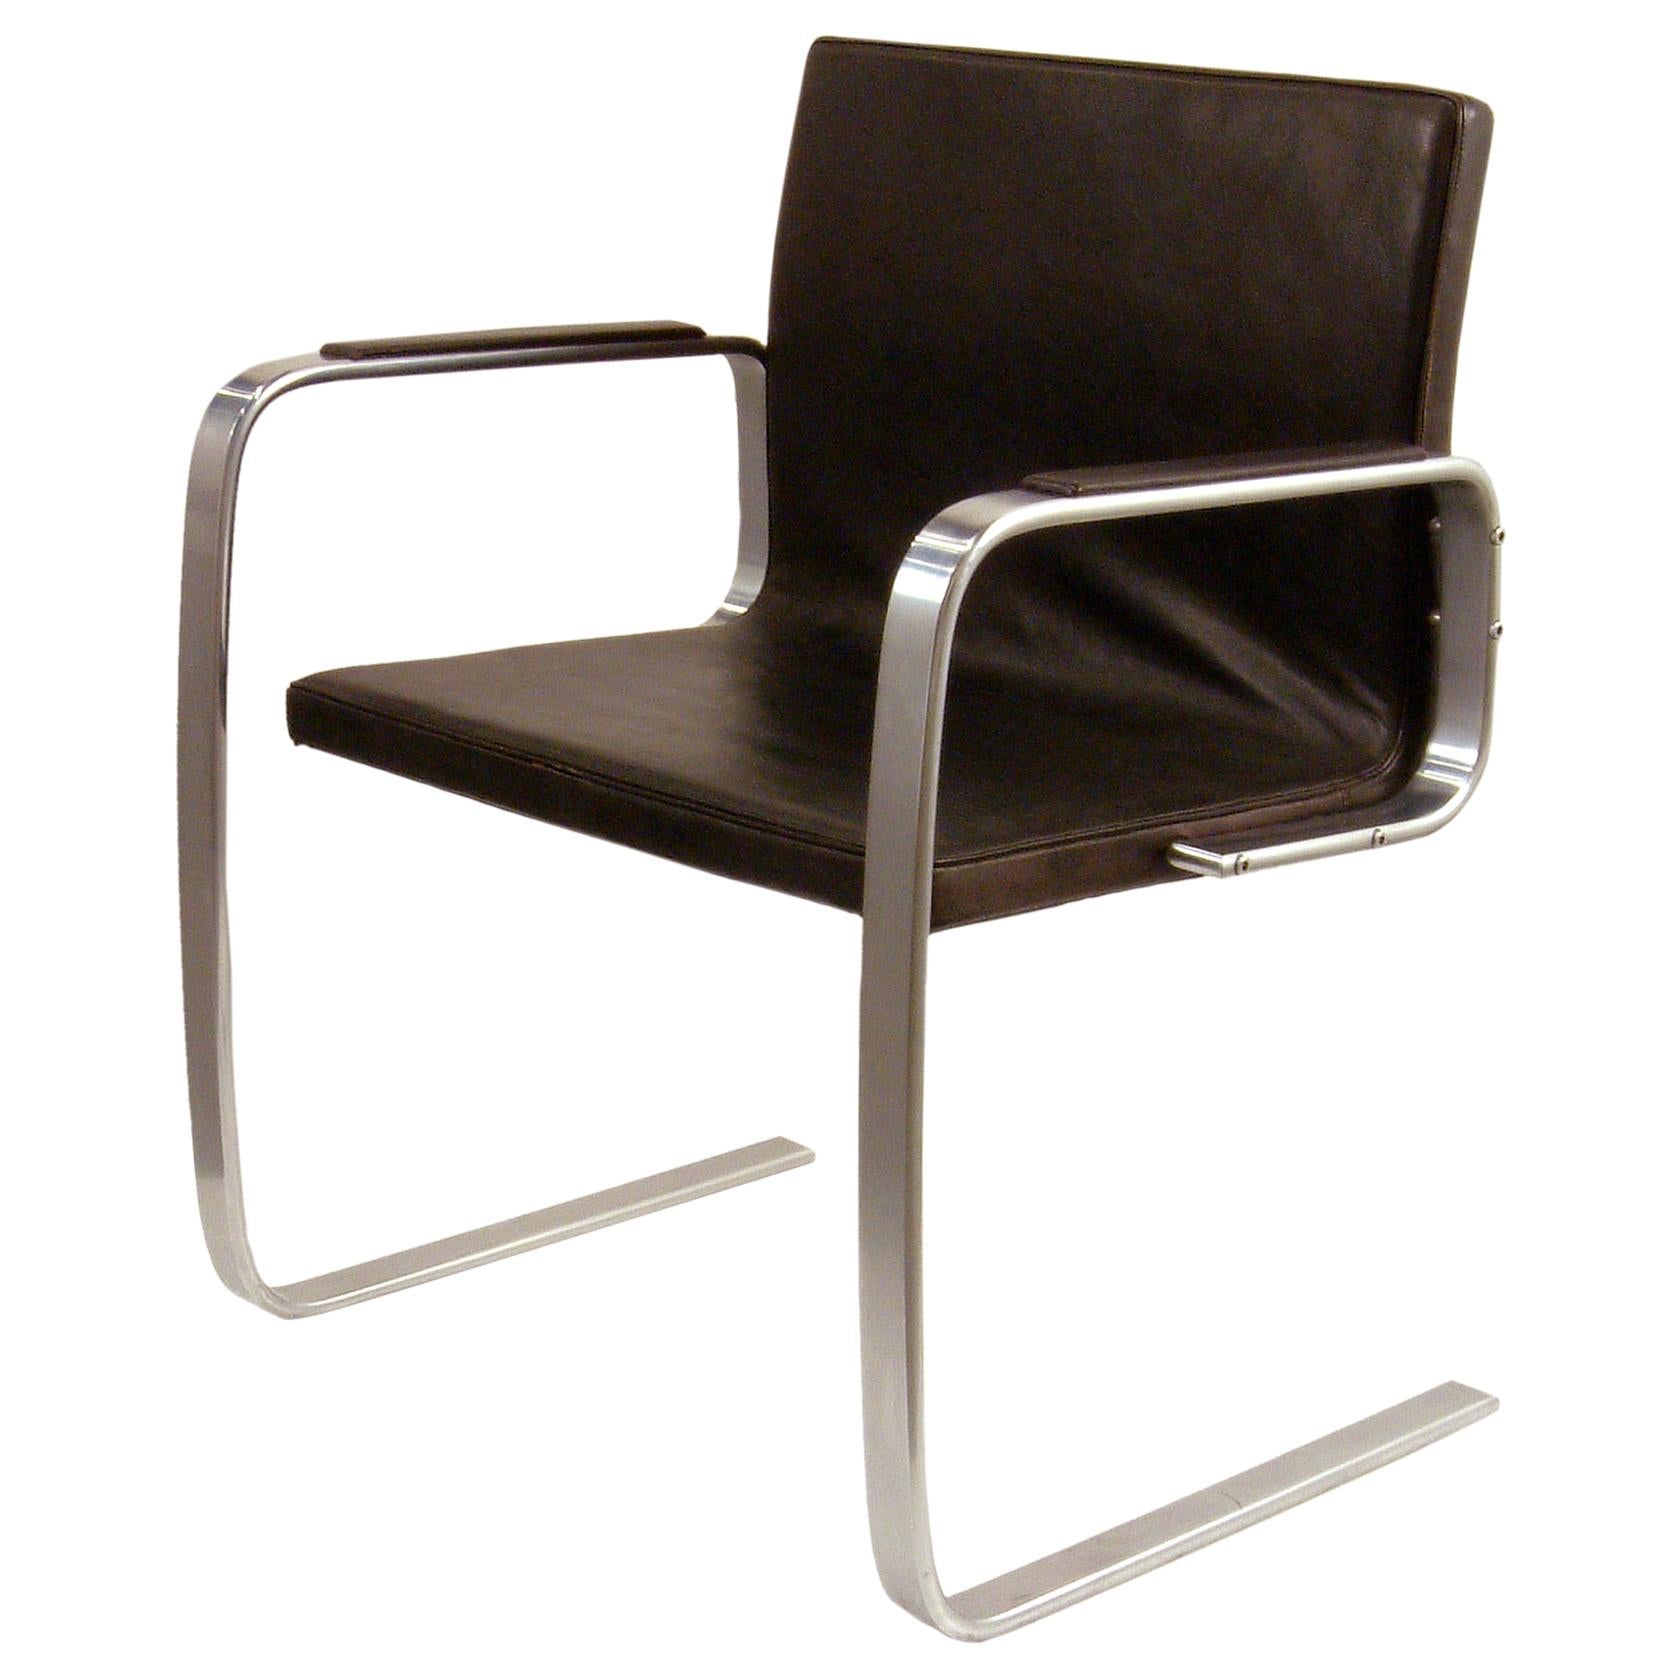 "Free Swinger" Armchair in Leather by Poul Kjaerholm, circa 1974 For Sale